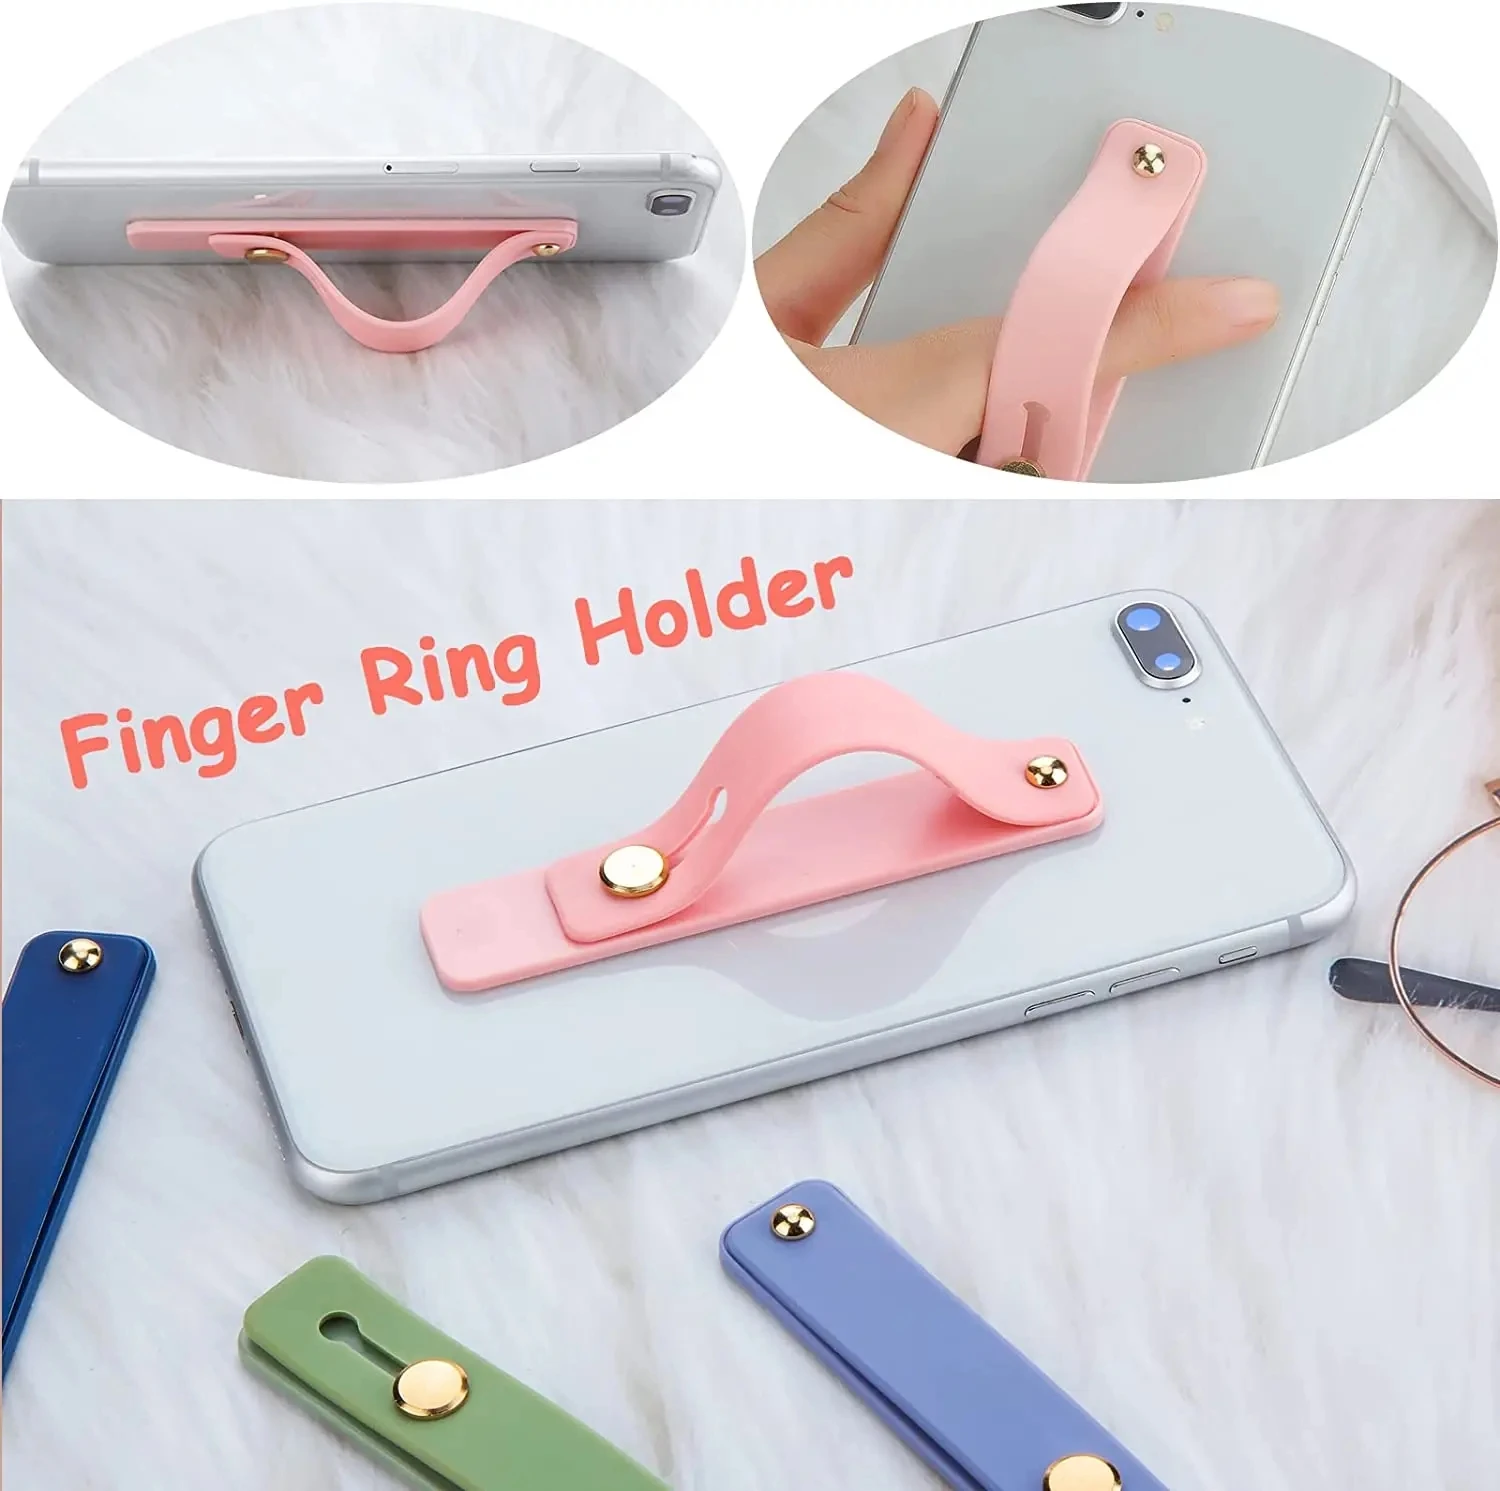 Phone Strap Grip Holder Finger Cell Phone Grip Telescopic Strap Stand Universal Kickstand For iPhone Samsung Xiaomi Huawei etc